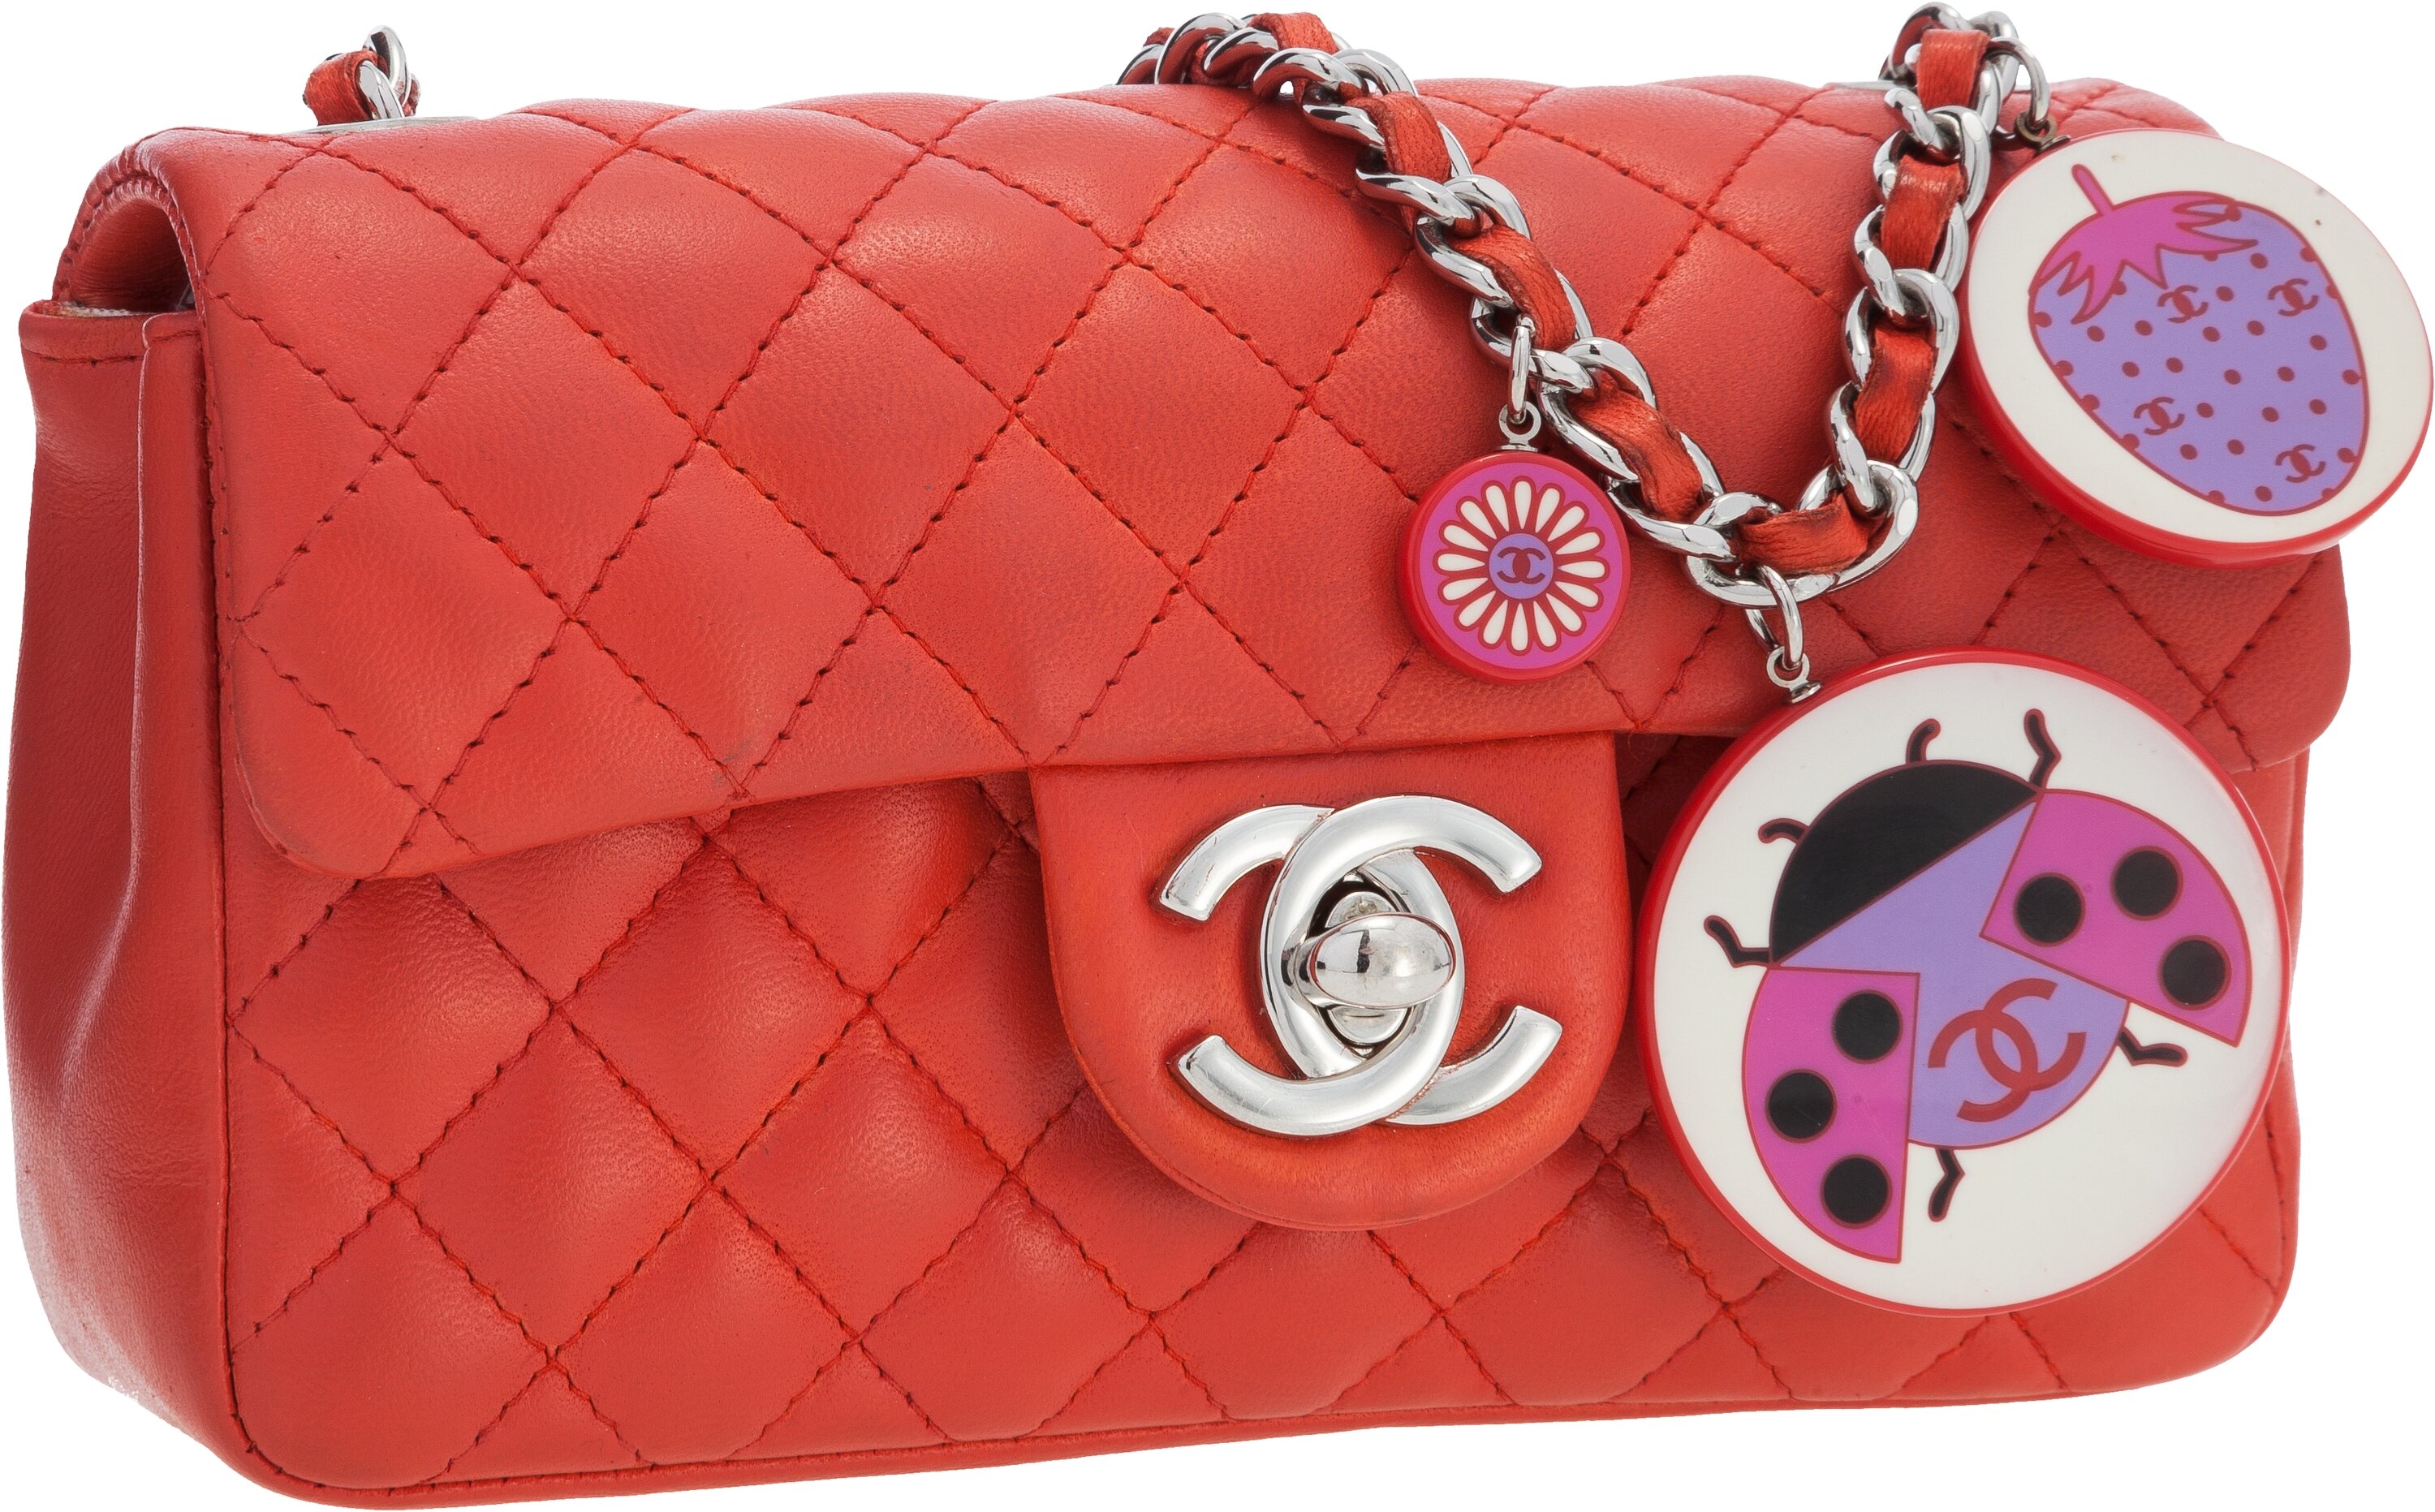 Chanel 2003 Limited Edition Mini Red Ladybug Flap Bag · INTO